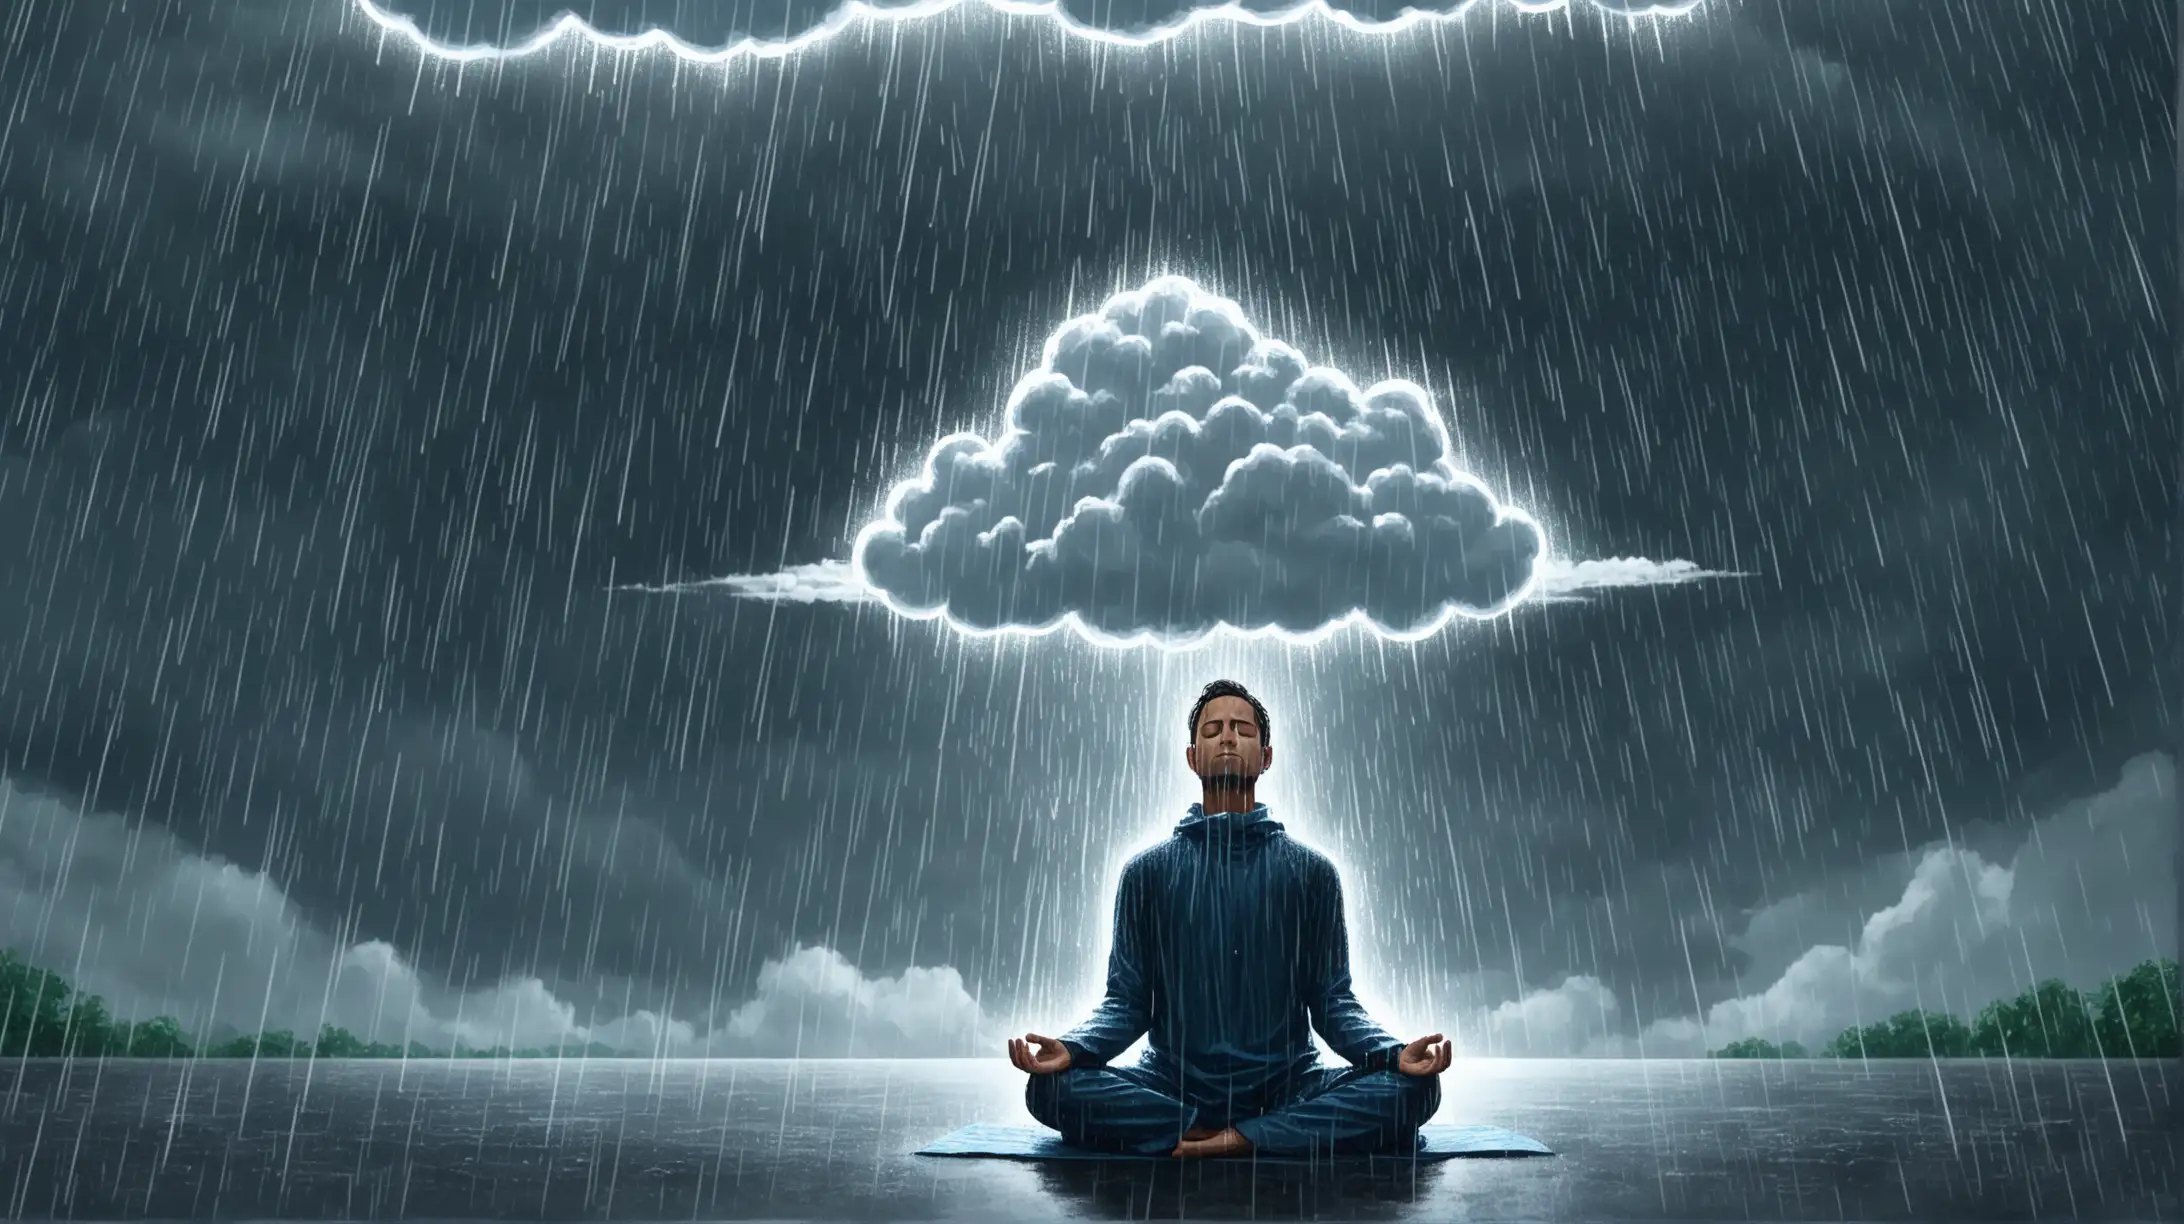 a man sits meditating directly under a single cloud, it is raining heavily on him, he is soaked from the rain drops
